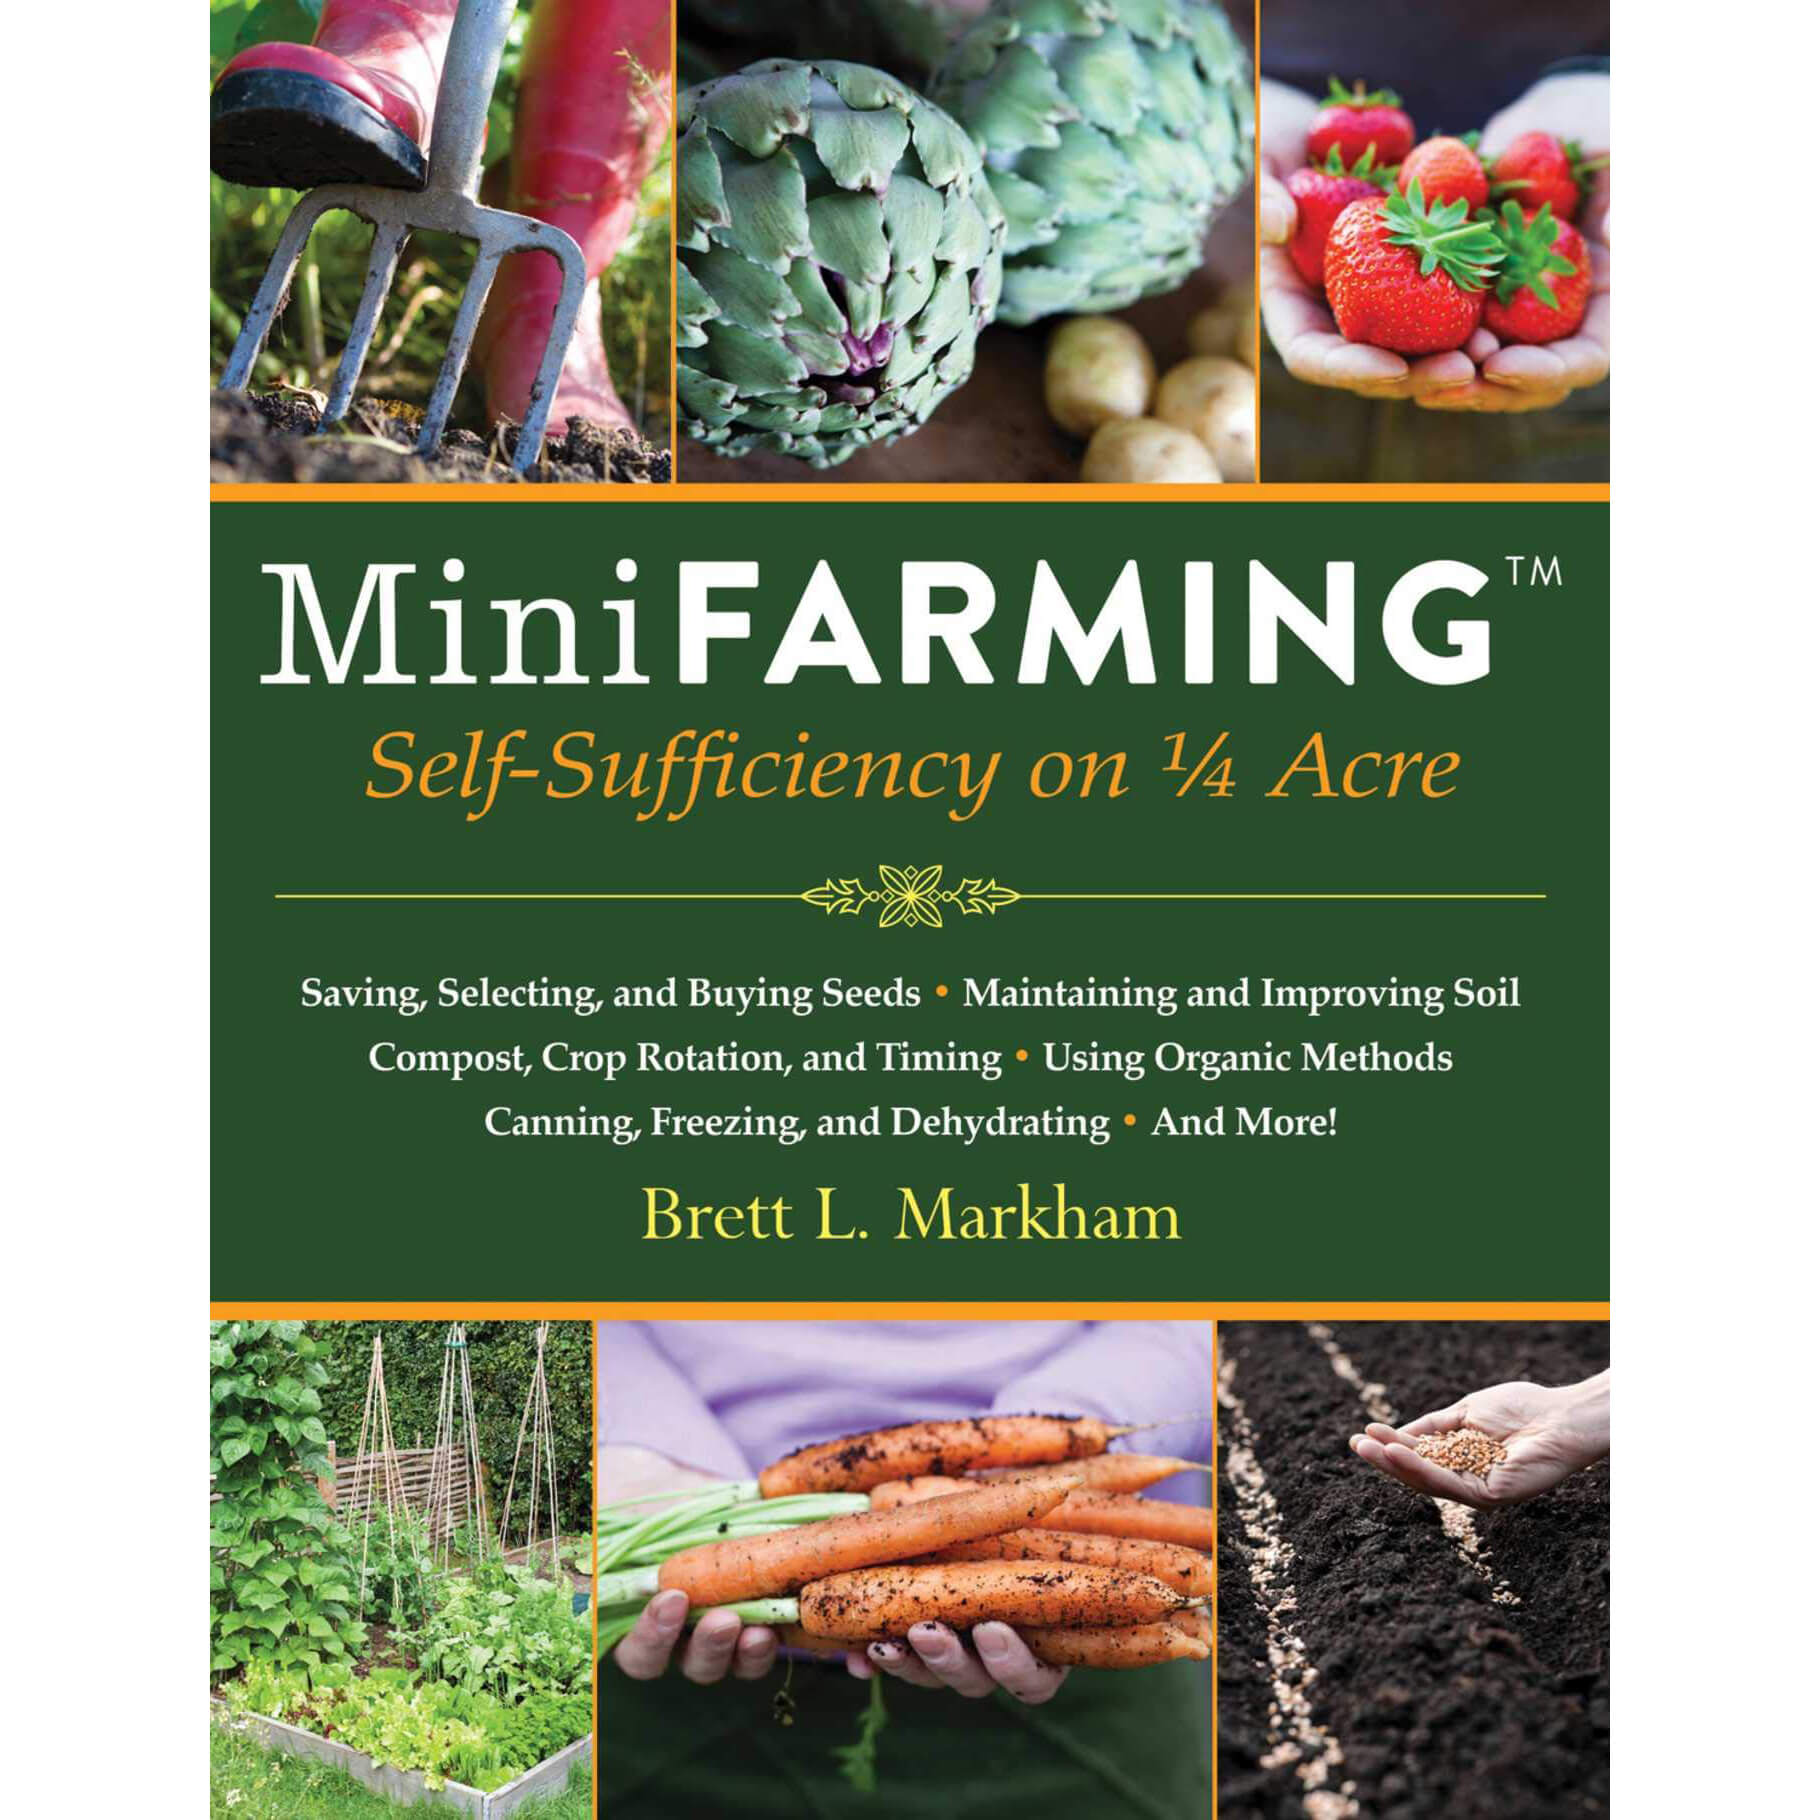 Mini Farming: Self-Sufficiency on 1/4 Acre front cover.